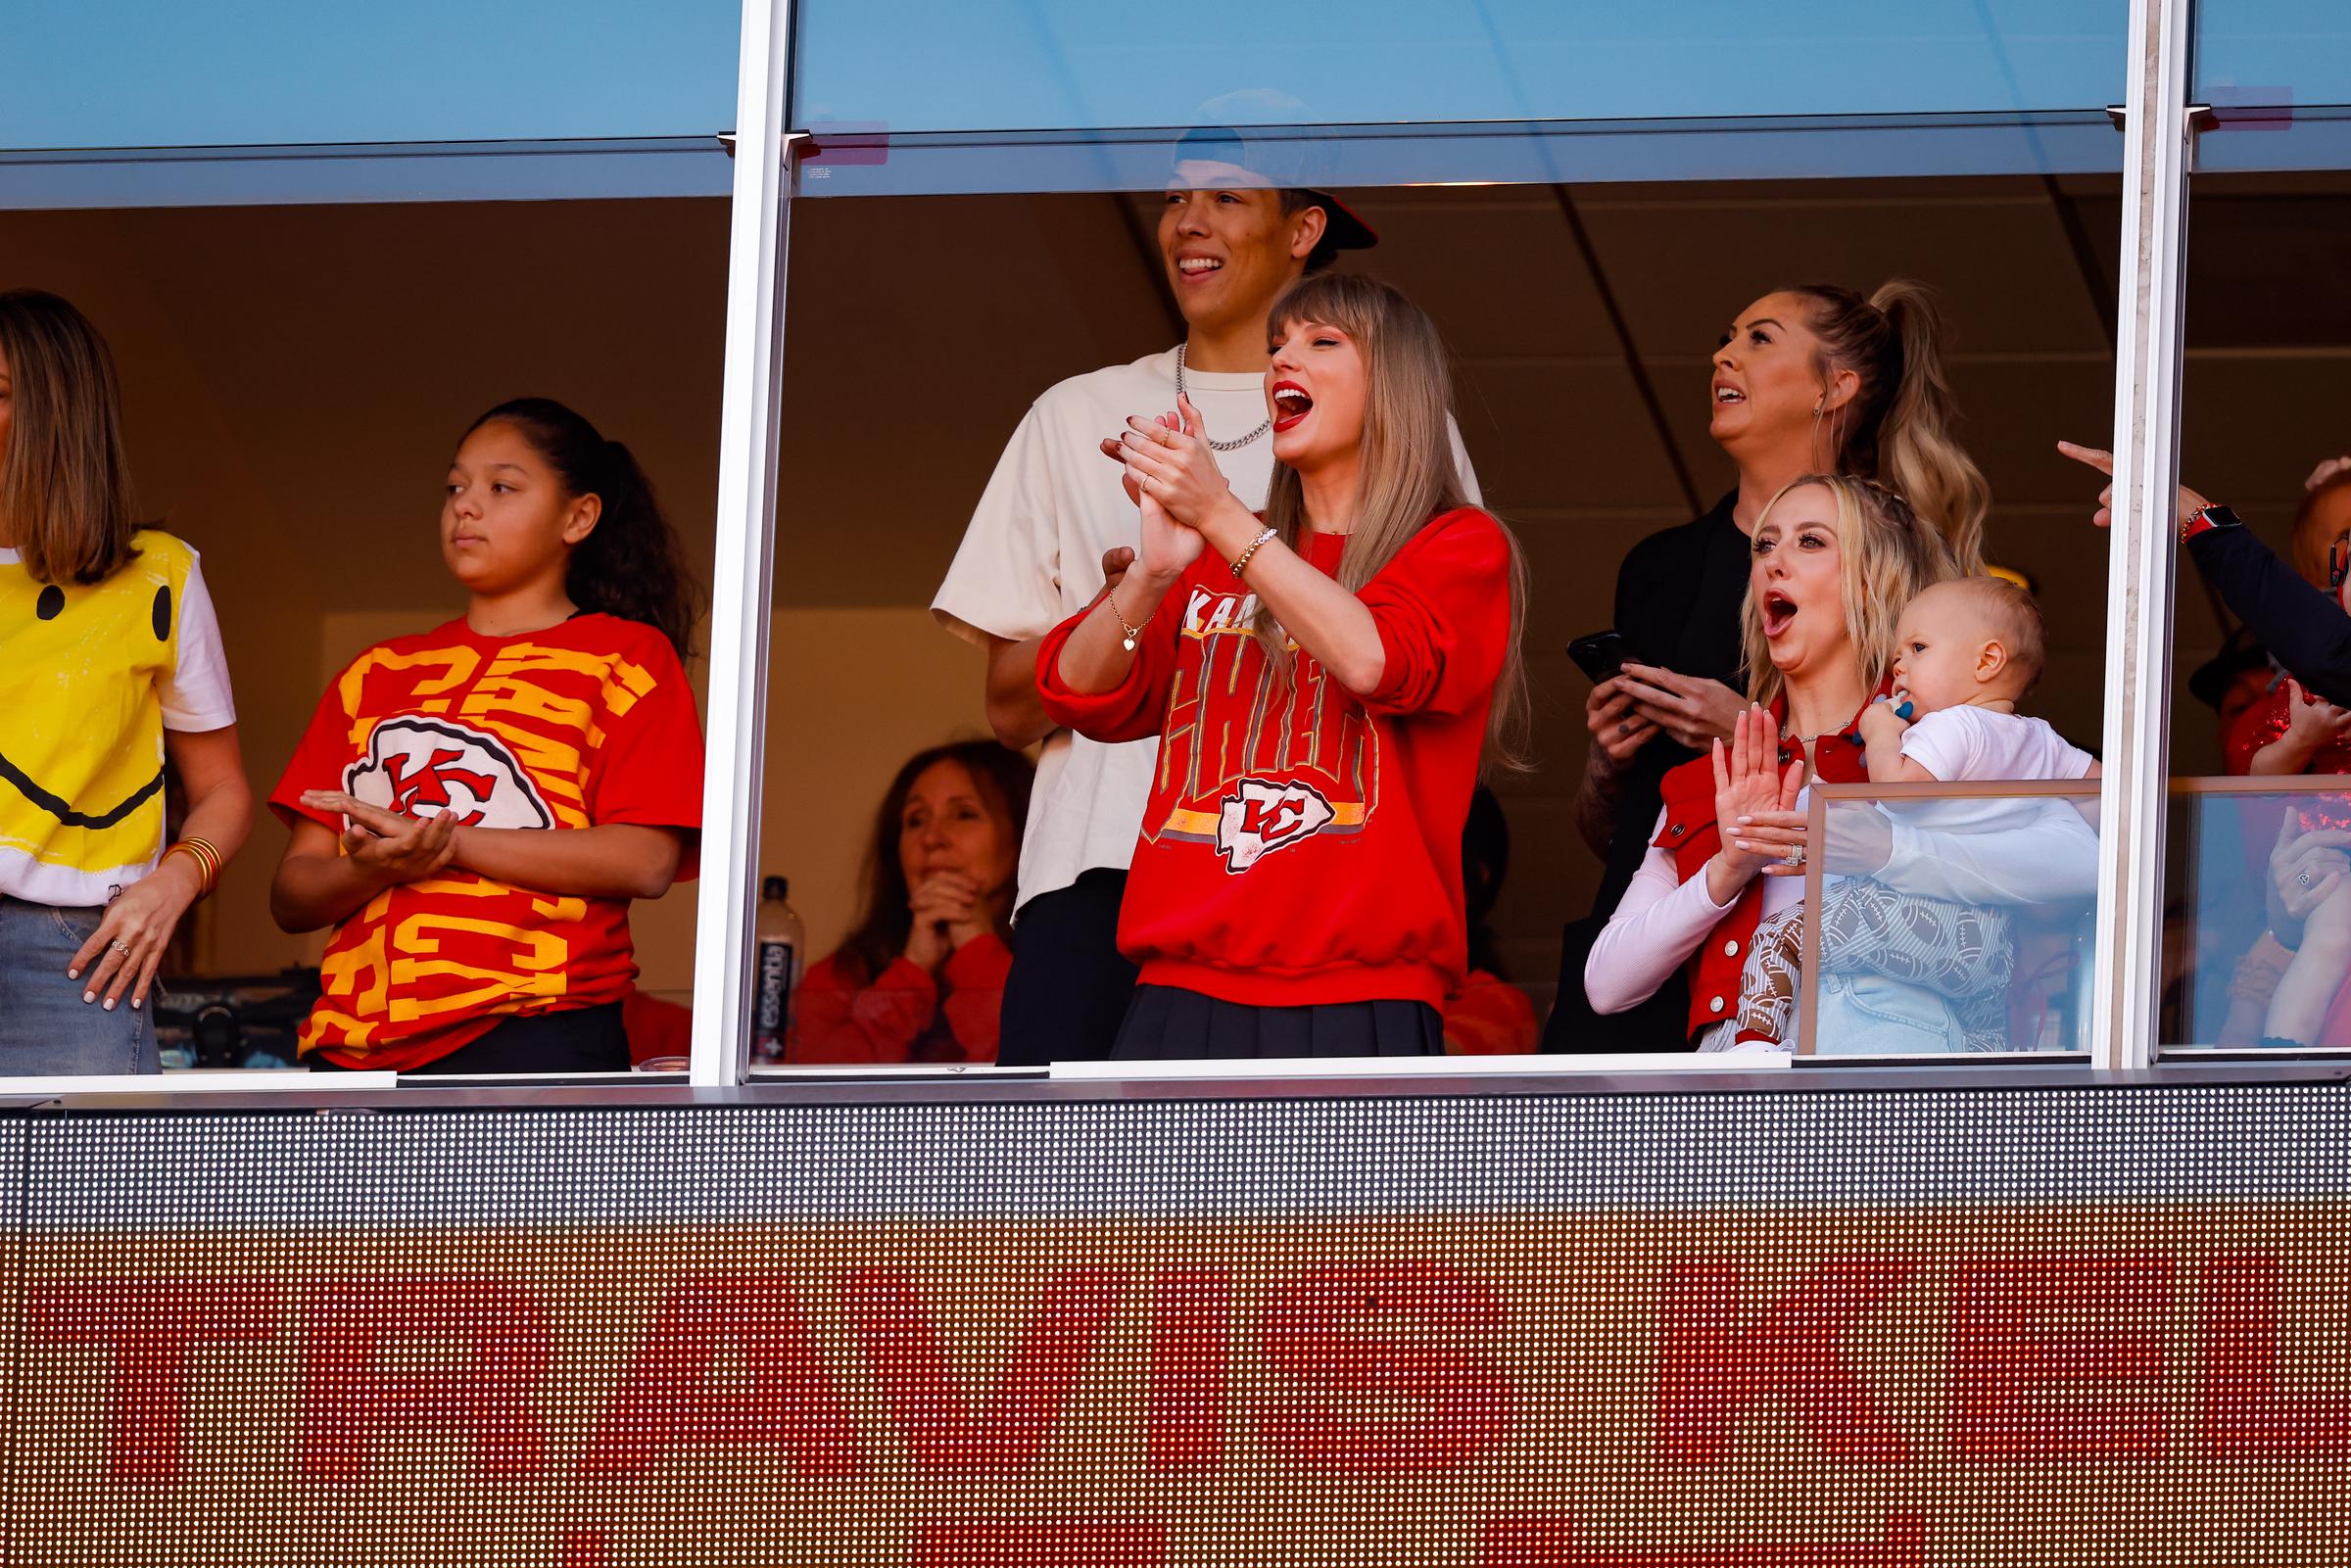 Taylor Swift cheering during a game between the Kansas City Chiefs and the Los Angeles Chargers in Kansas City, Missouri on October 22, 2023 | Source: Getty Images